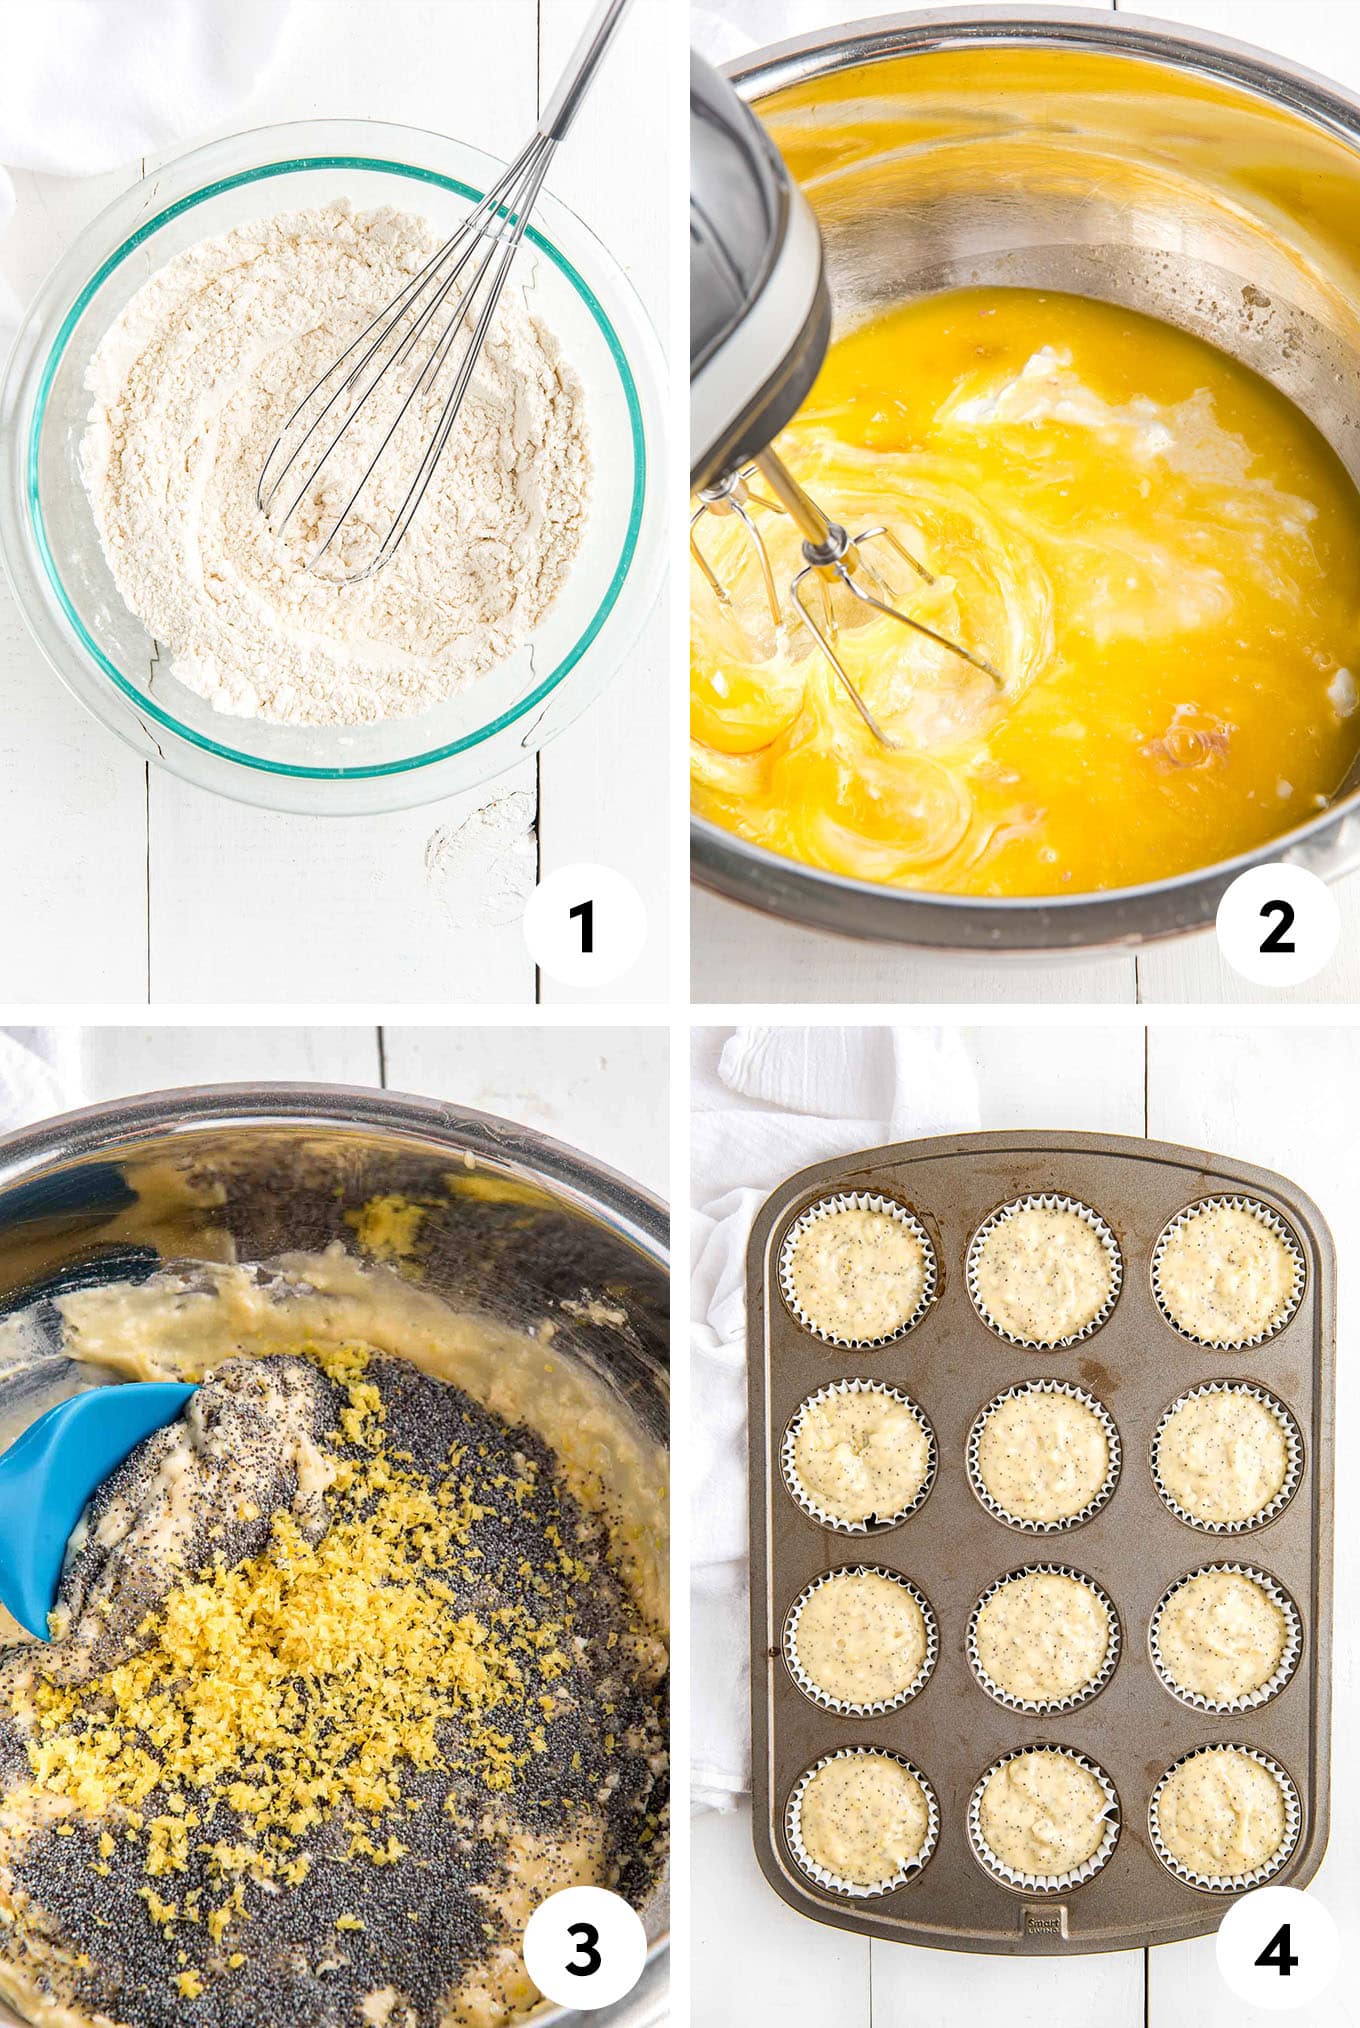 Steps for making lemon muffins with poppy seeds from mixing the flour, beating the sugar and eggs, to mixing in the poppy seeds and finally scooping into a pan.